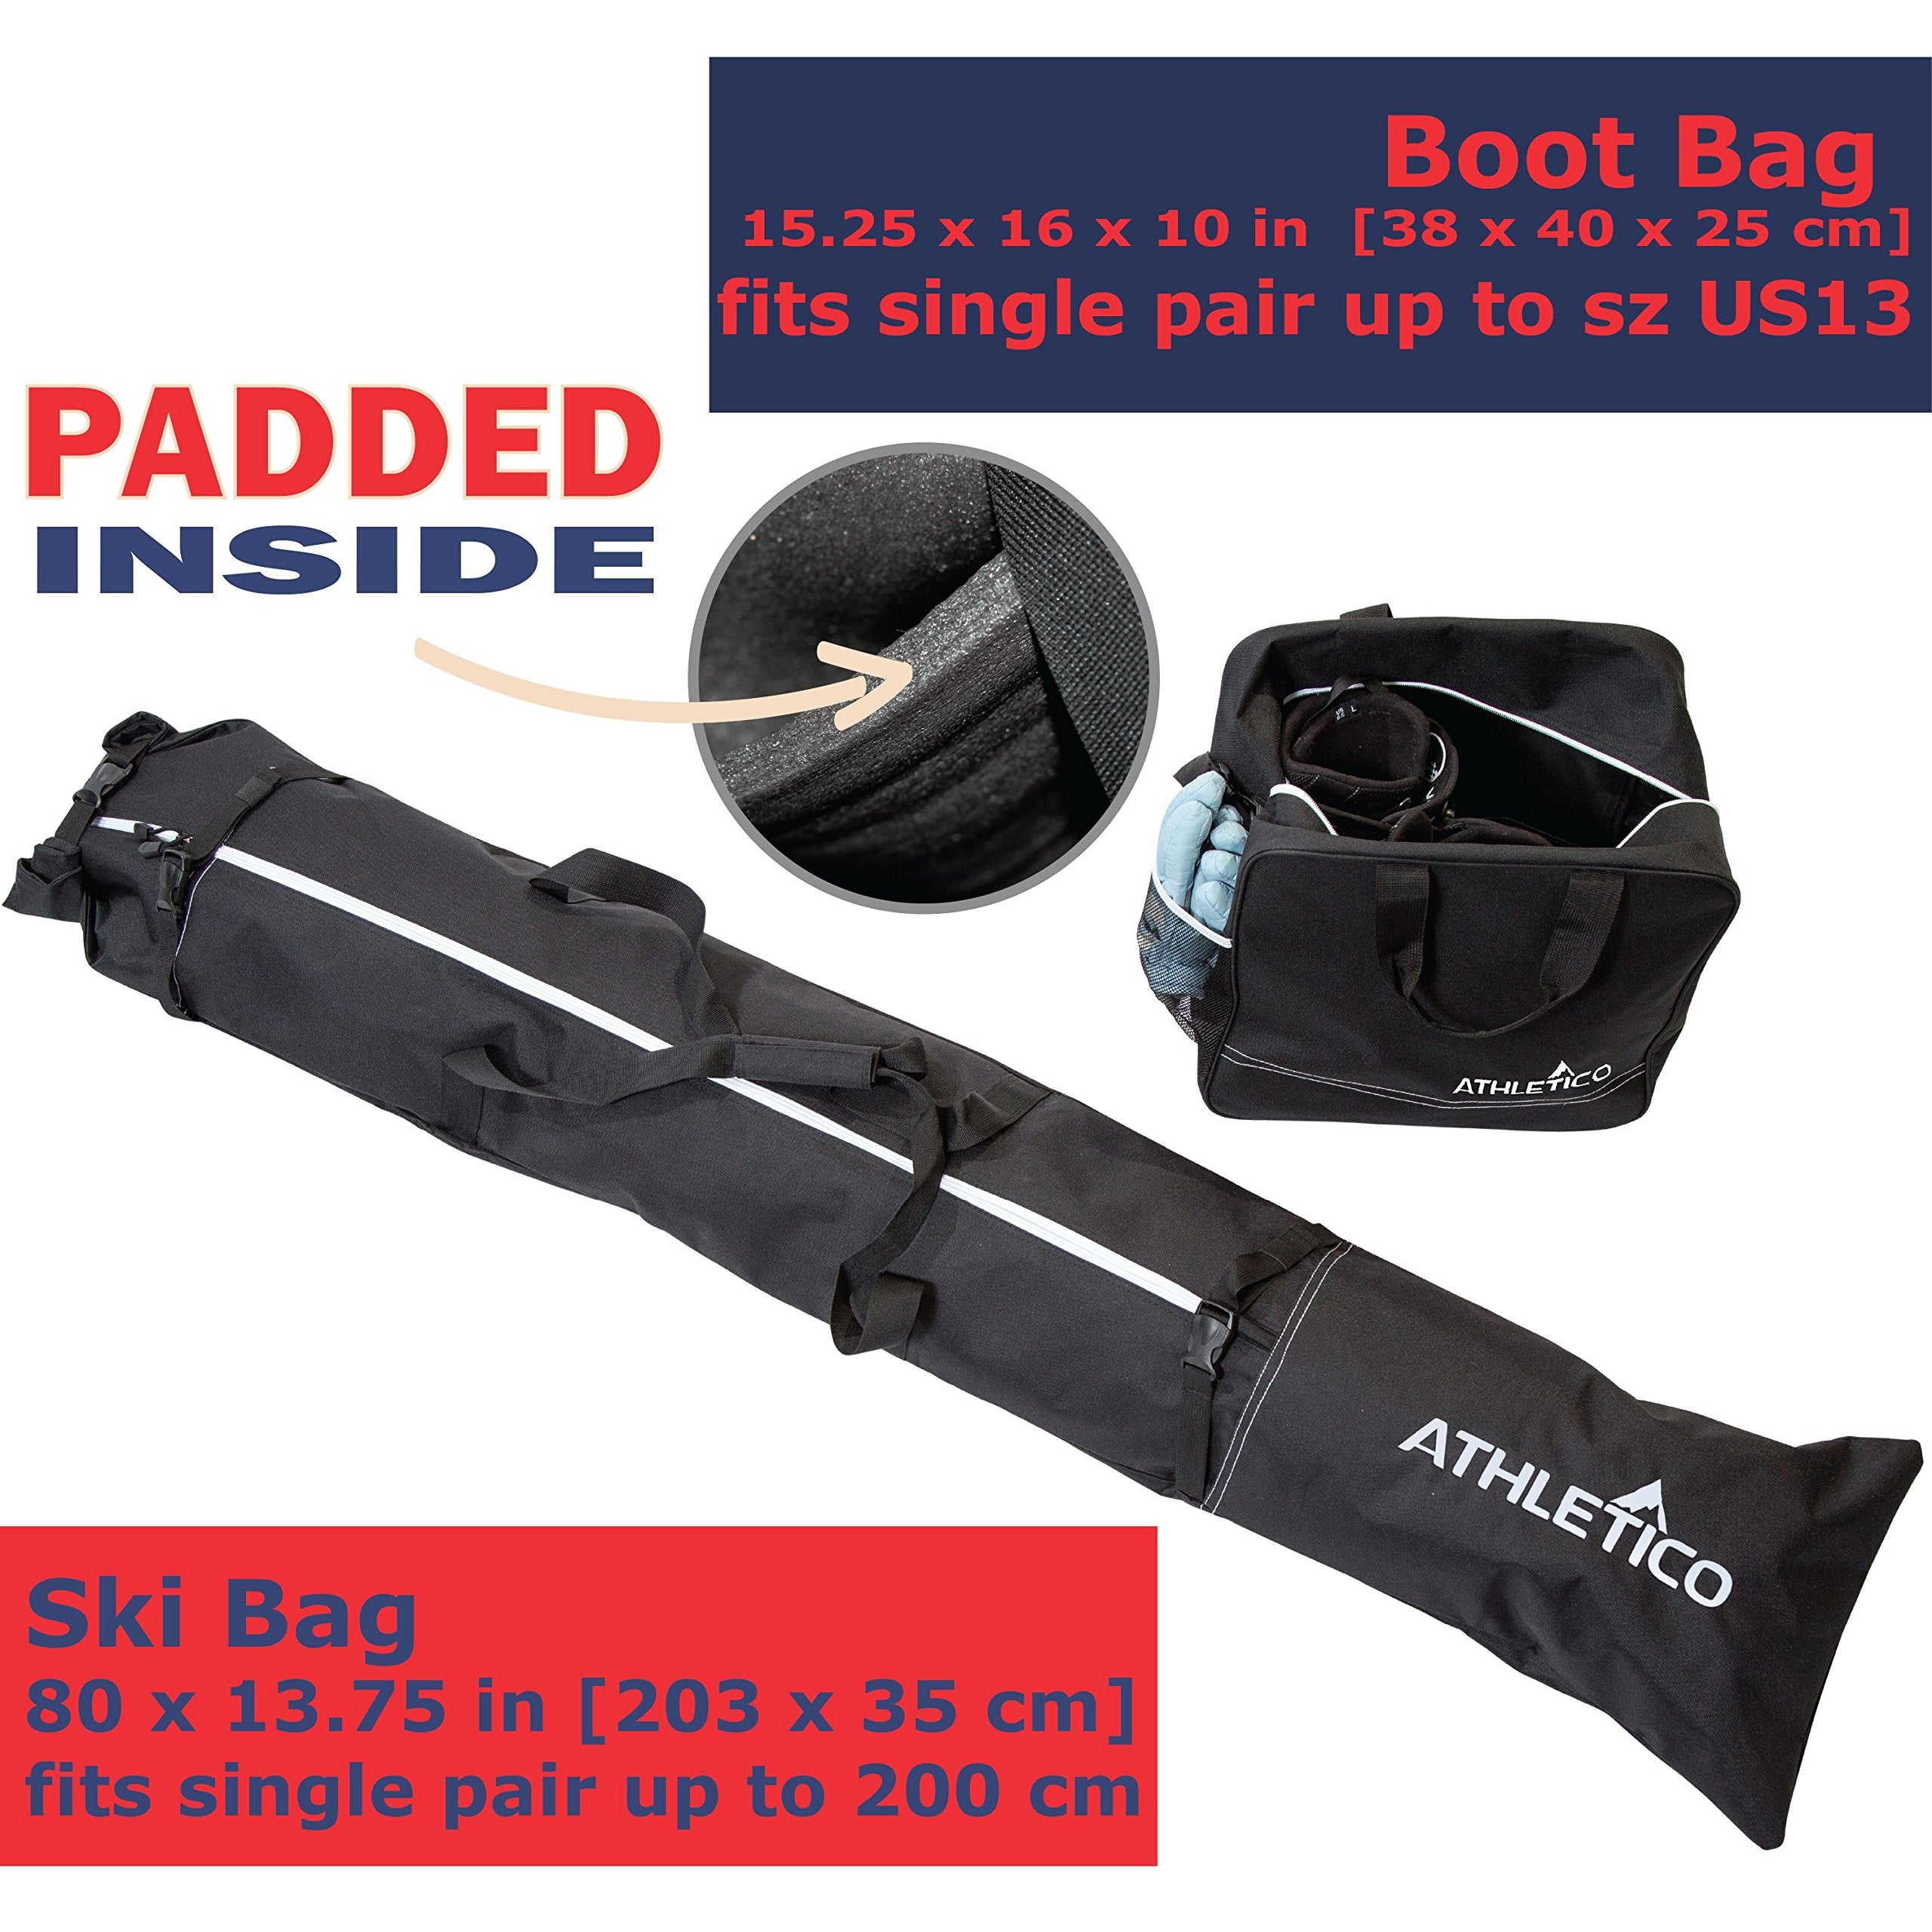 Athletico Padded Ski Bag Combo - Ski Bag & Separate Boot Bag - Store & Transport Skis Up to 200 CM and Boots Up To Size 13 - Padded to Protect All Your Ski Gear and Equipment for Travel (Black)  - Acceptable